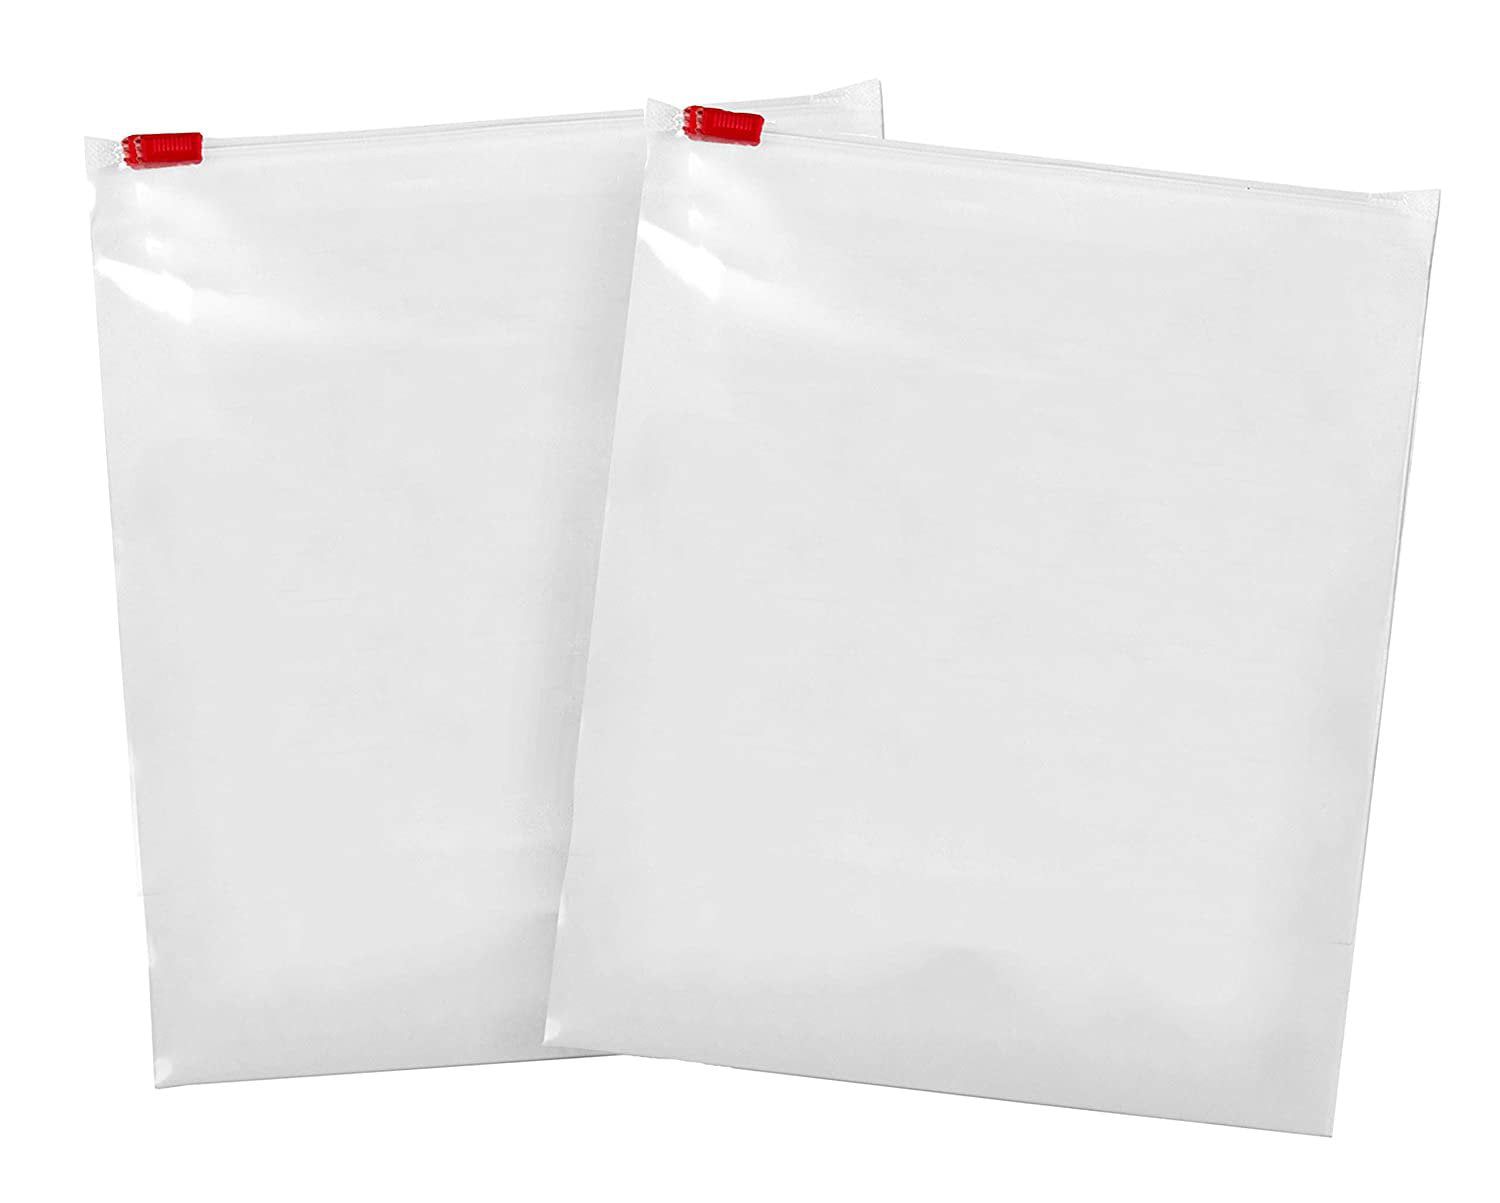 100 Large Clear Polythene Plastic Bags 18" x 24" Packaging/Packing 100g PWN 